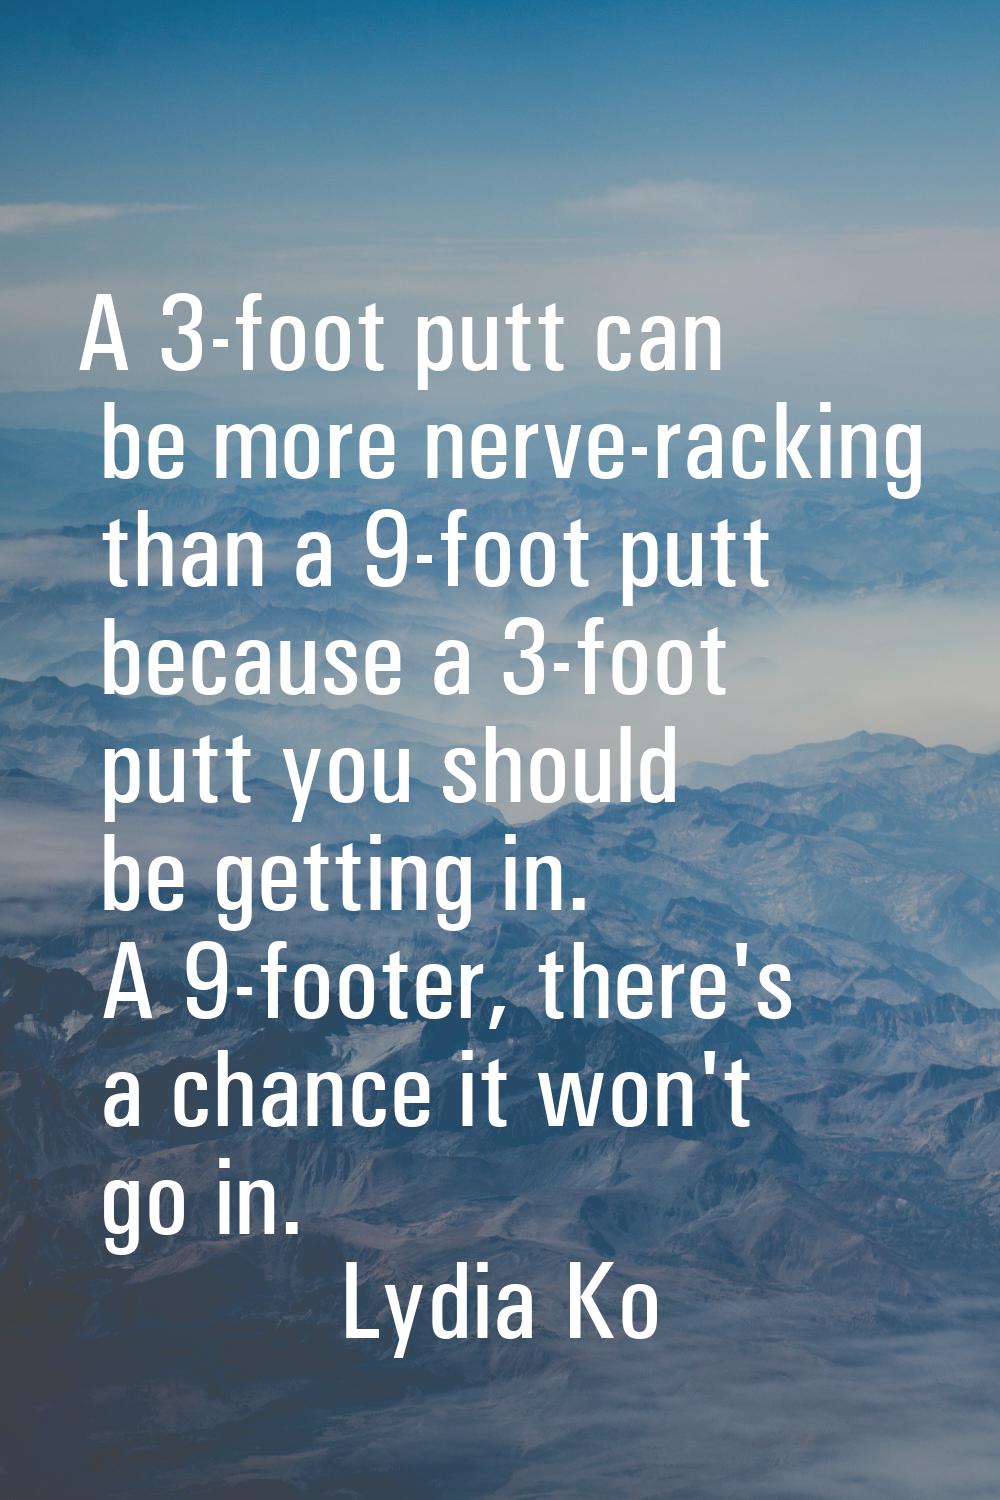 A 3-foot putt can be more nerve-racking than a 9-foot putt because a 3-foot putt you should be gett